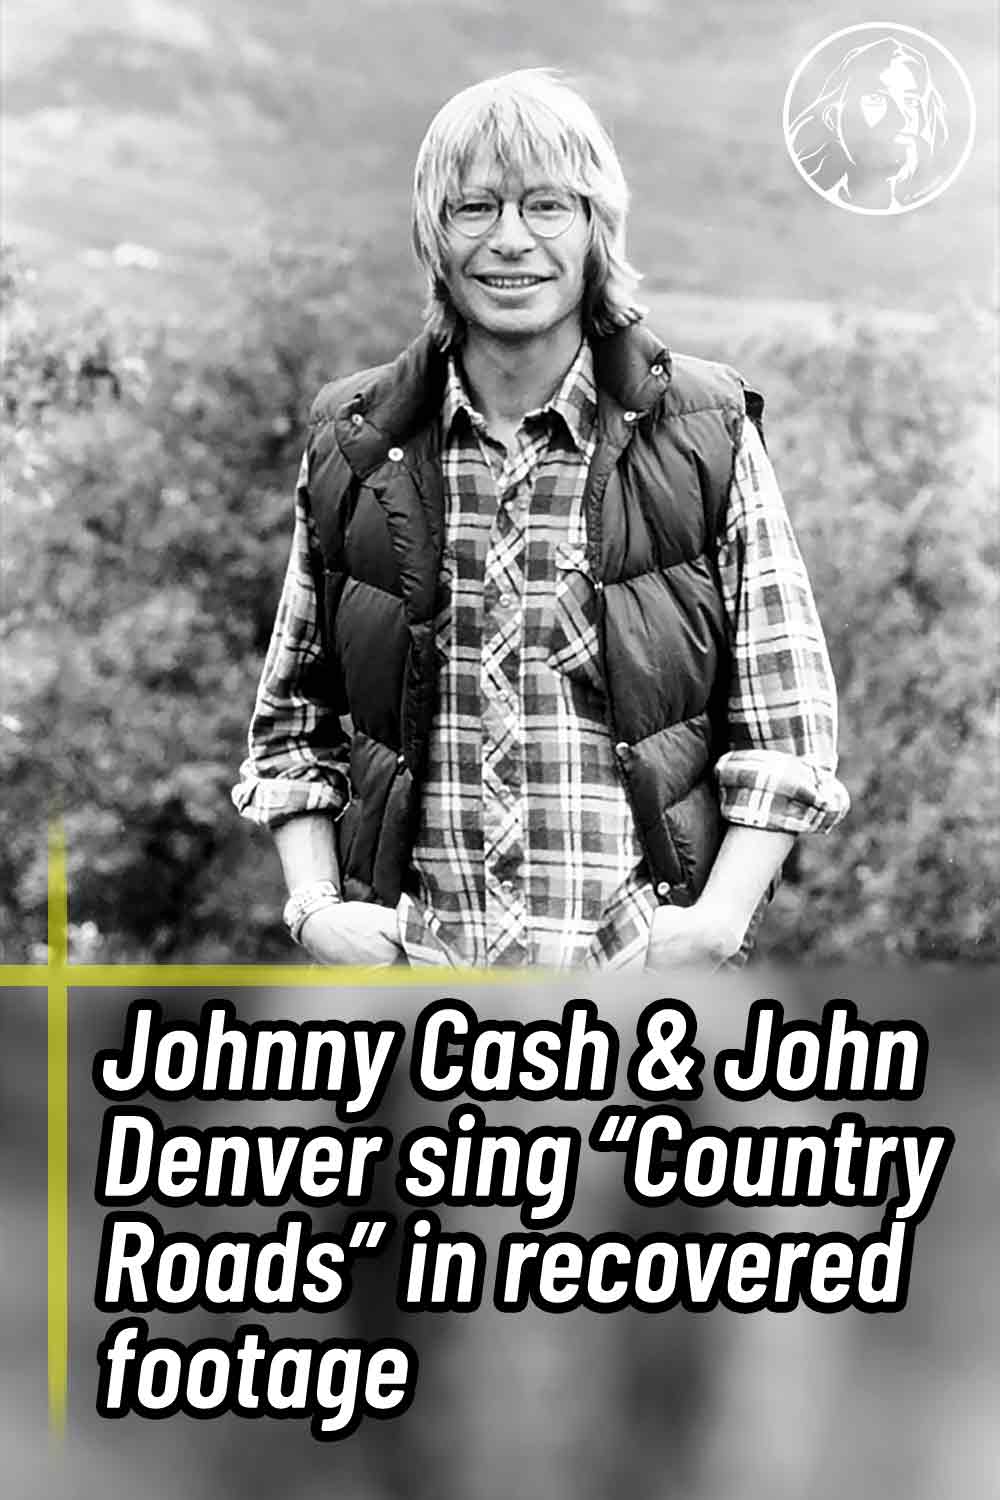 Johnny Cash & John Denver sing “Country Roads” in recovered footage